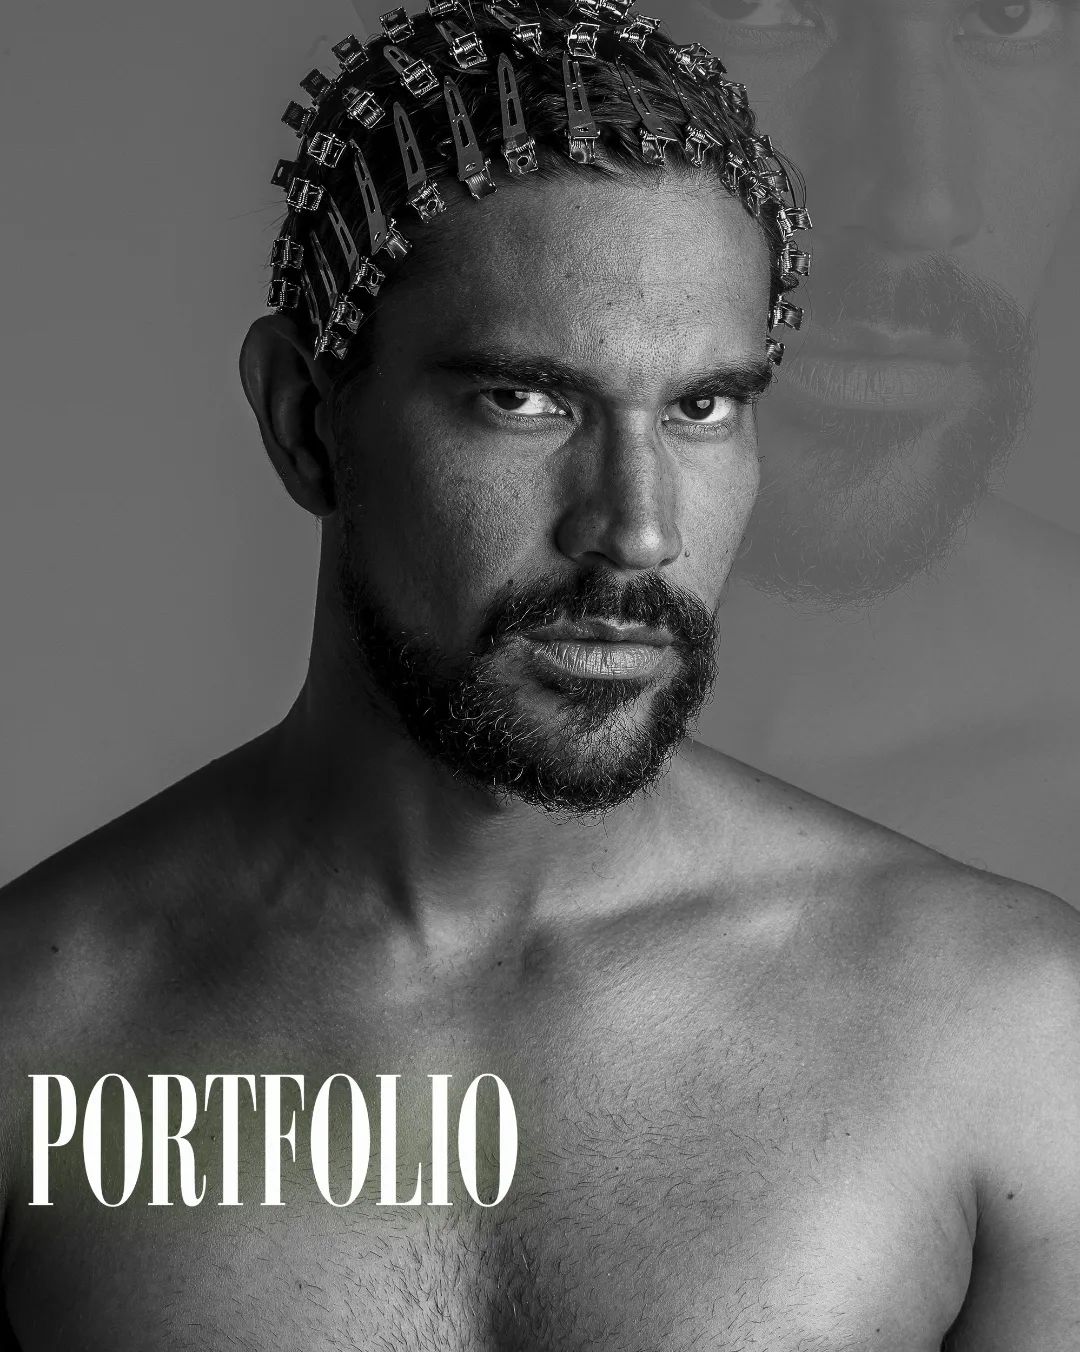 https://d.radikal.host/2023/04/06/Photo-by-REVISTA-PORTFOLIO-BRAZIL-on-March-19-2023.-May-be-a-black-and-white-image-of-1-person-beard-and-text-that-says-U-PORTFOLIO..jpg